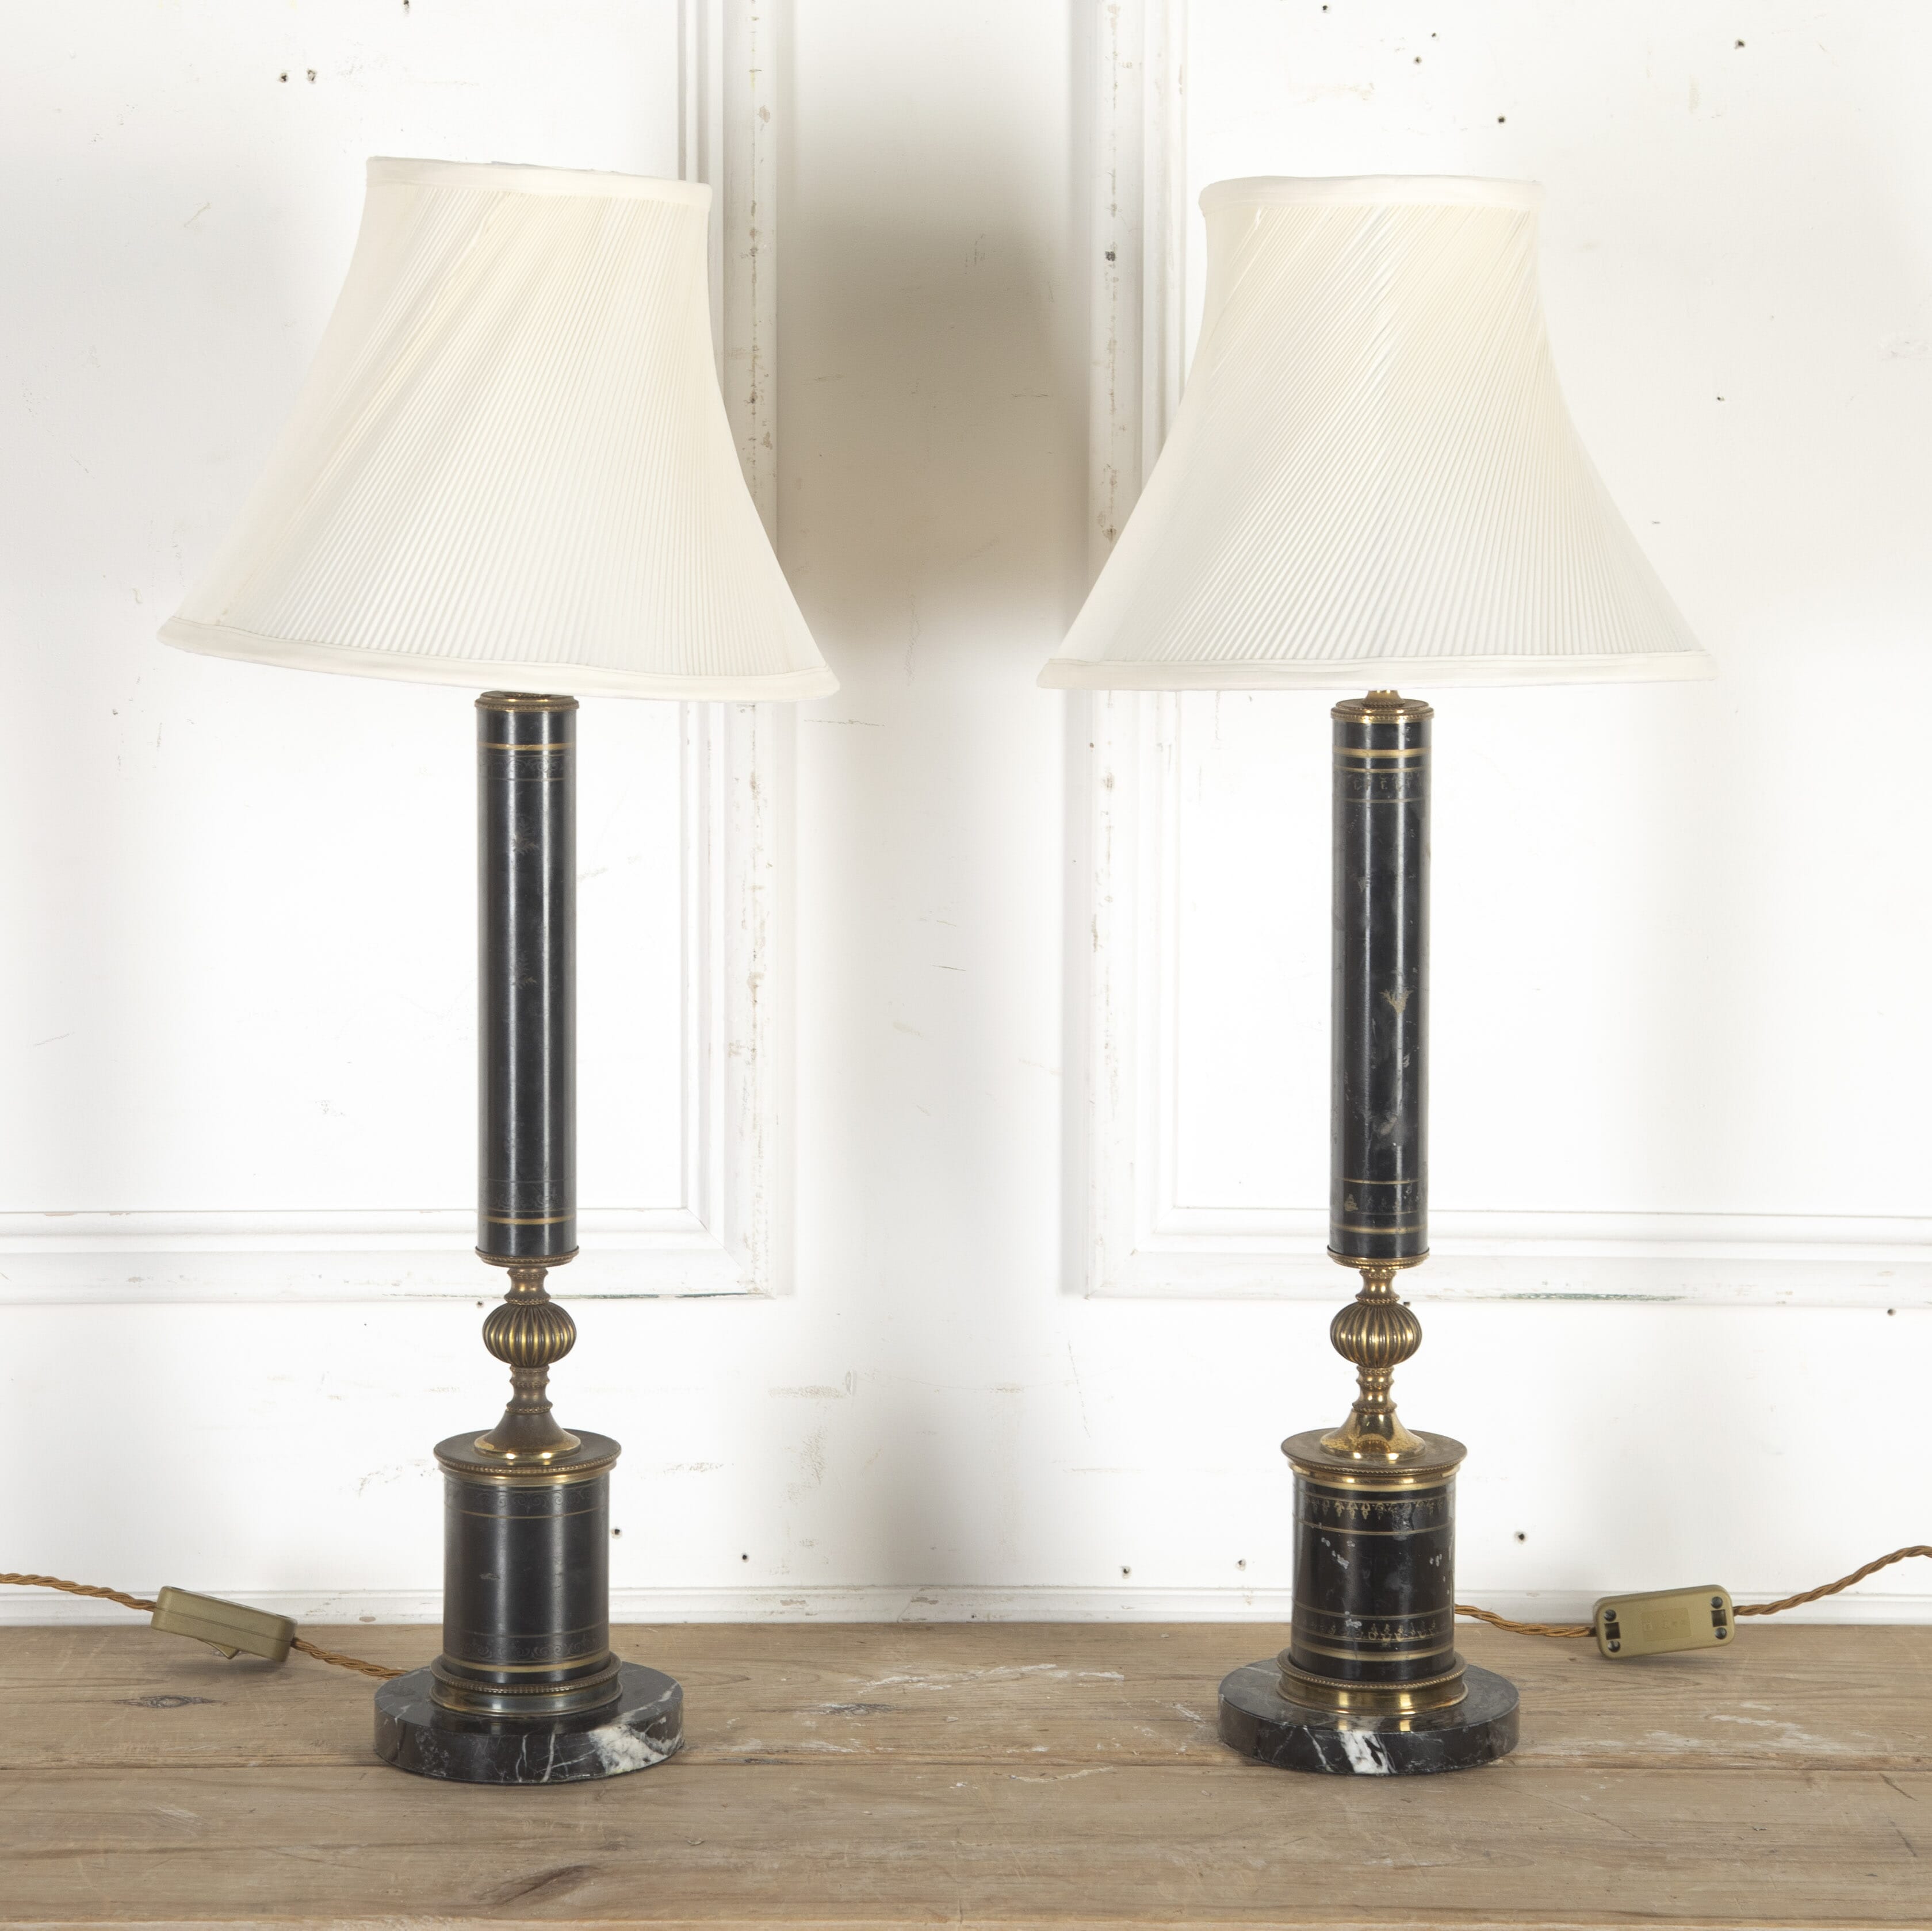 Pair Of French Toleware Table Lamps, Toleware Table Lamps